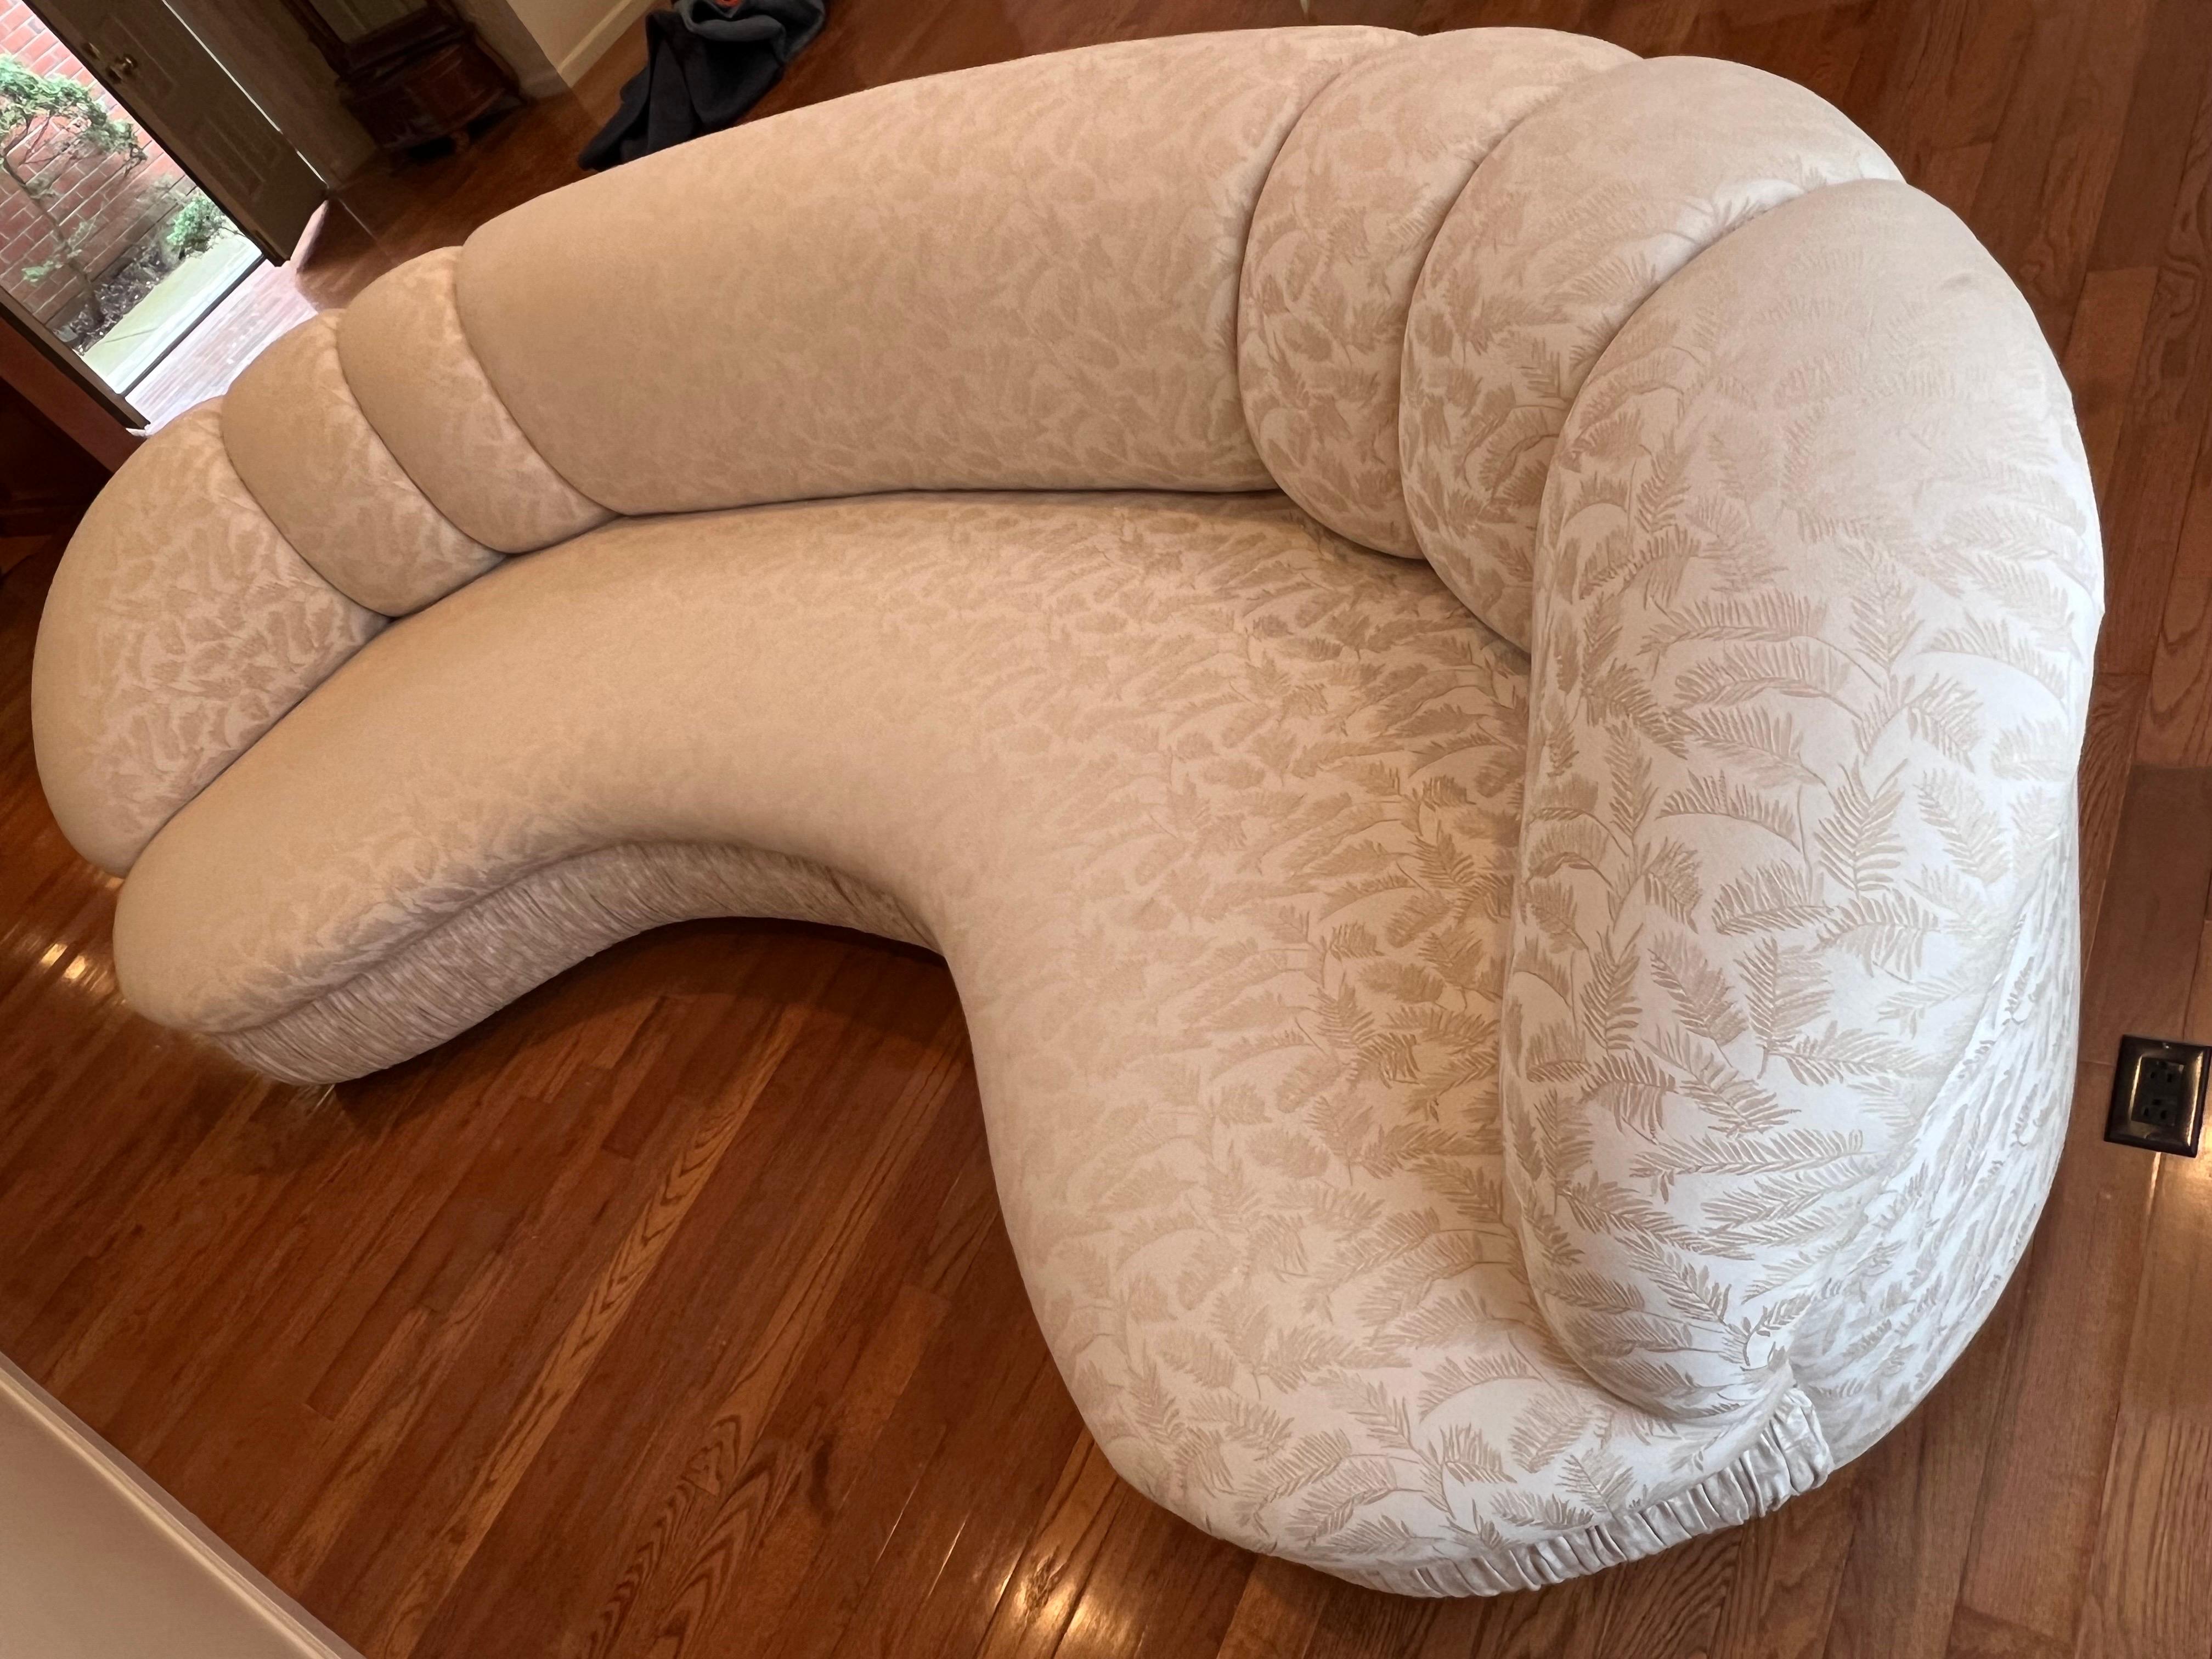 Postmodern kidney sofa with unique textile patterns. Custom Made in 1980 in fantastic condition.